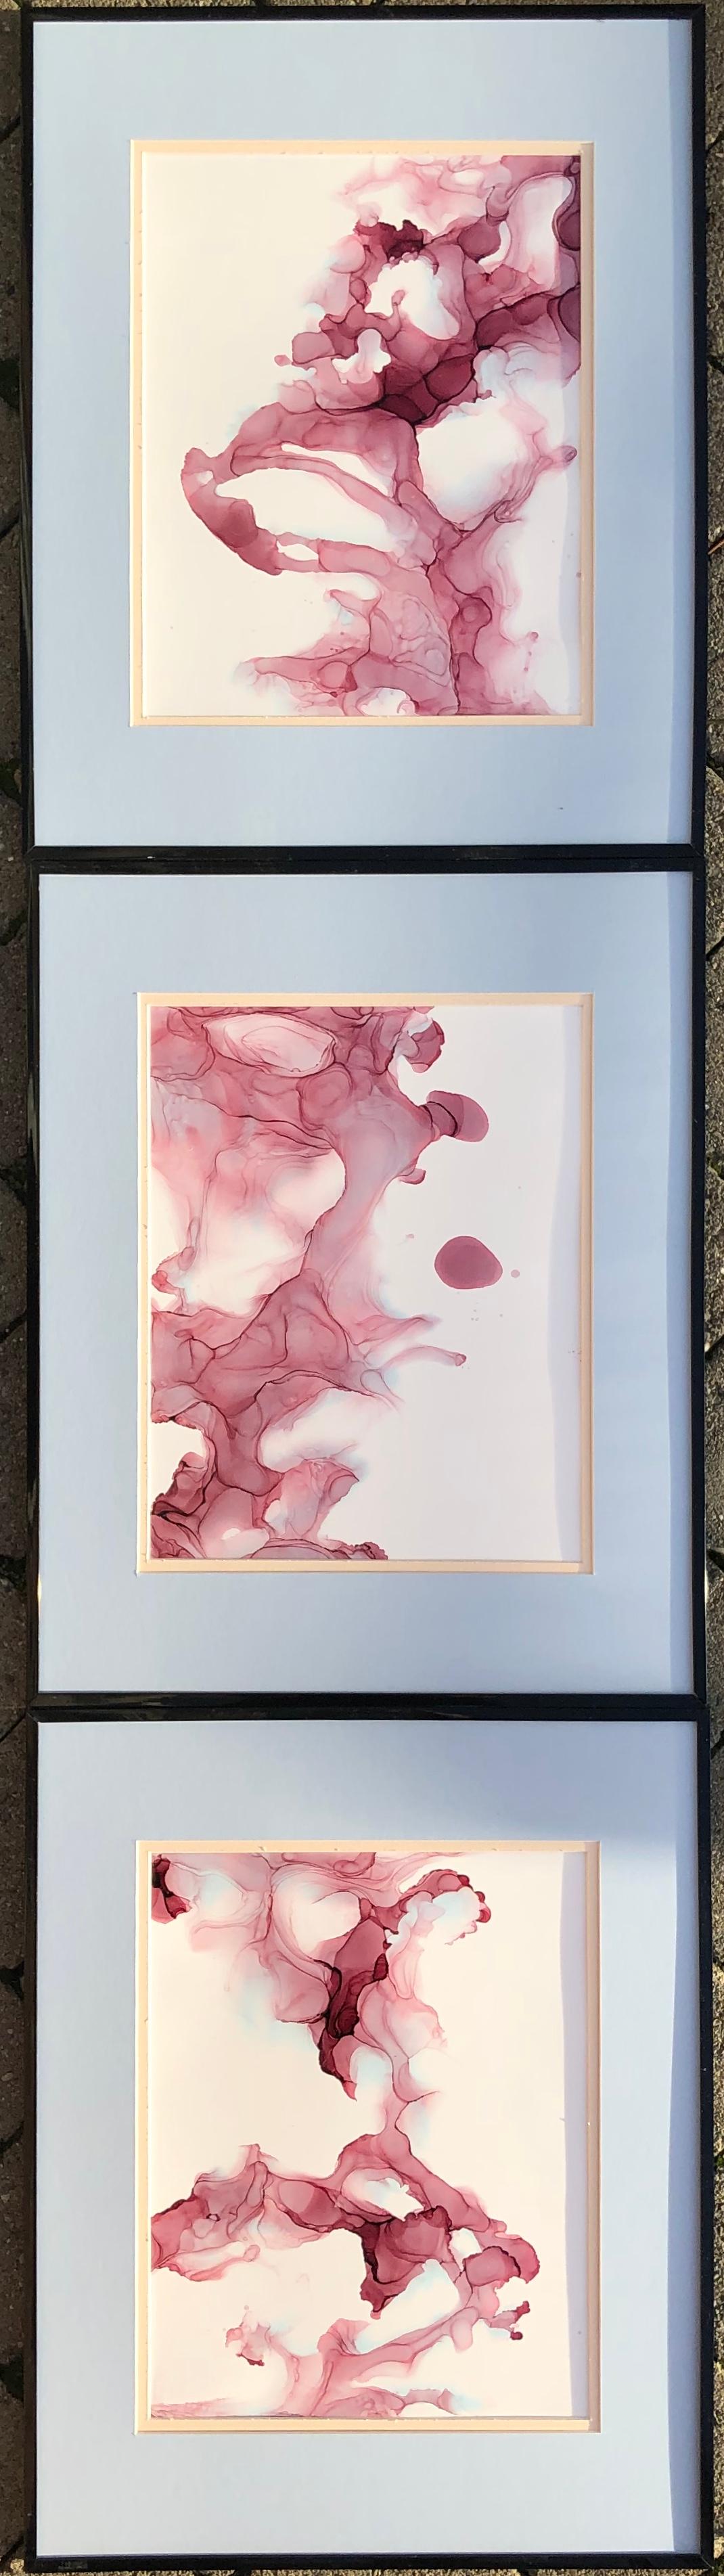 Mila Akopova Abstract Drawing - Line of fate-abstraction art, made in pale pink, light blue, rose colored